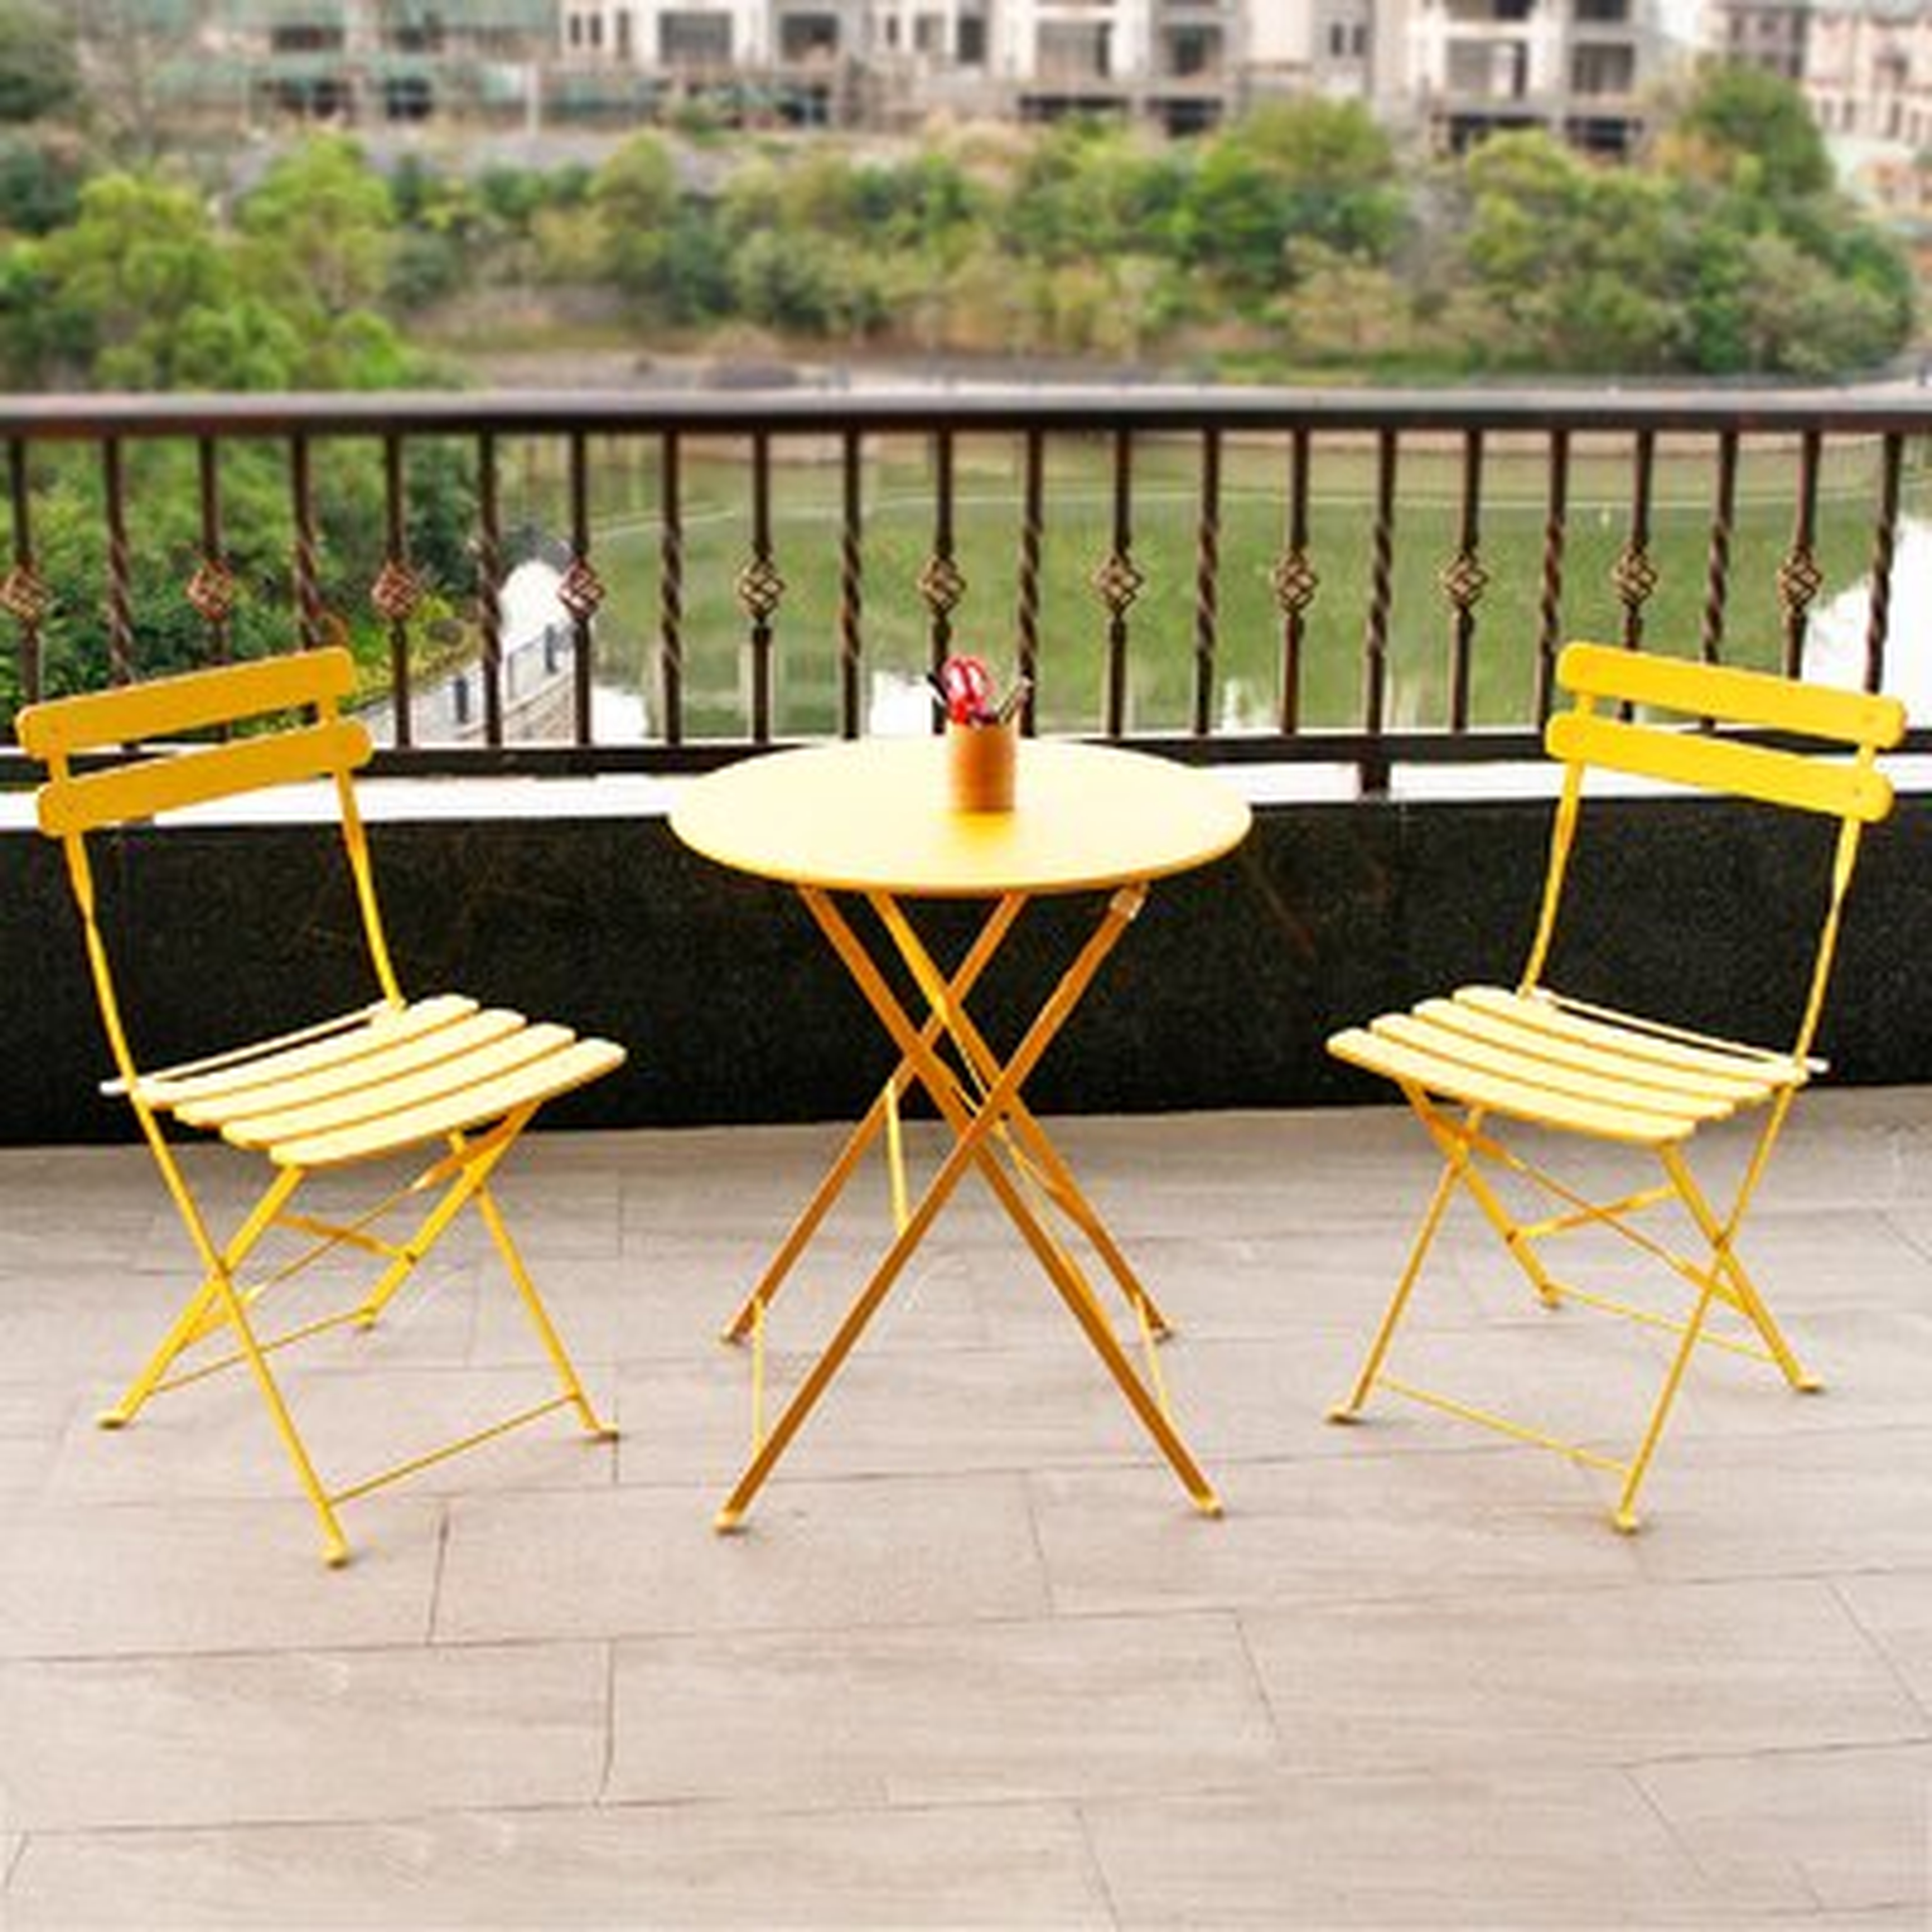 Premium Steel Patio Bistro Set, Folding Outdoor Patio Furniture Sets, 3 Piece Patio Set Of Foldable Patio Table And Chairs, Yellow - Wayfair